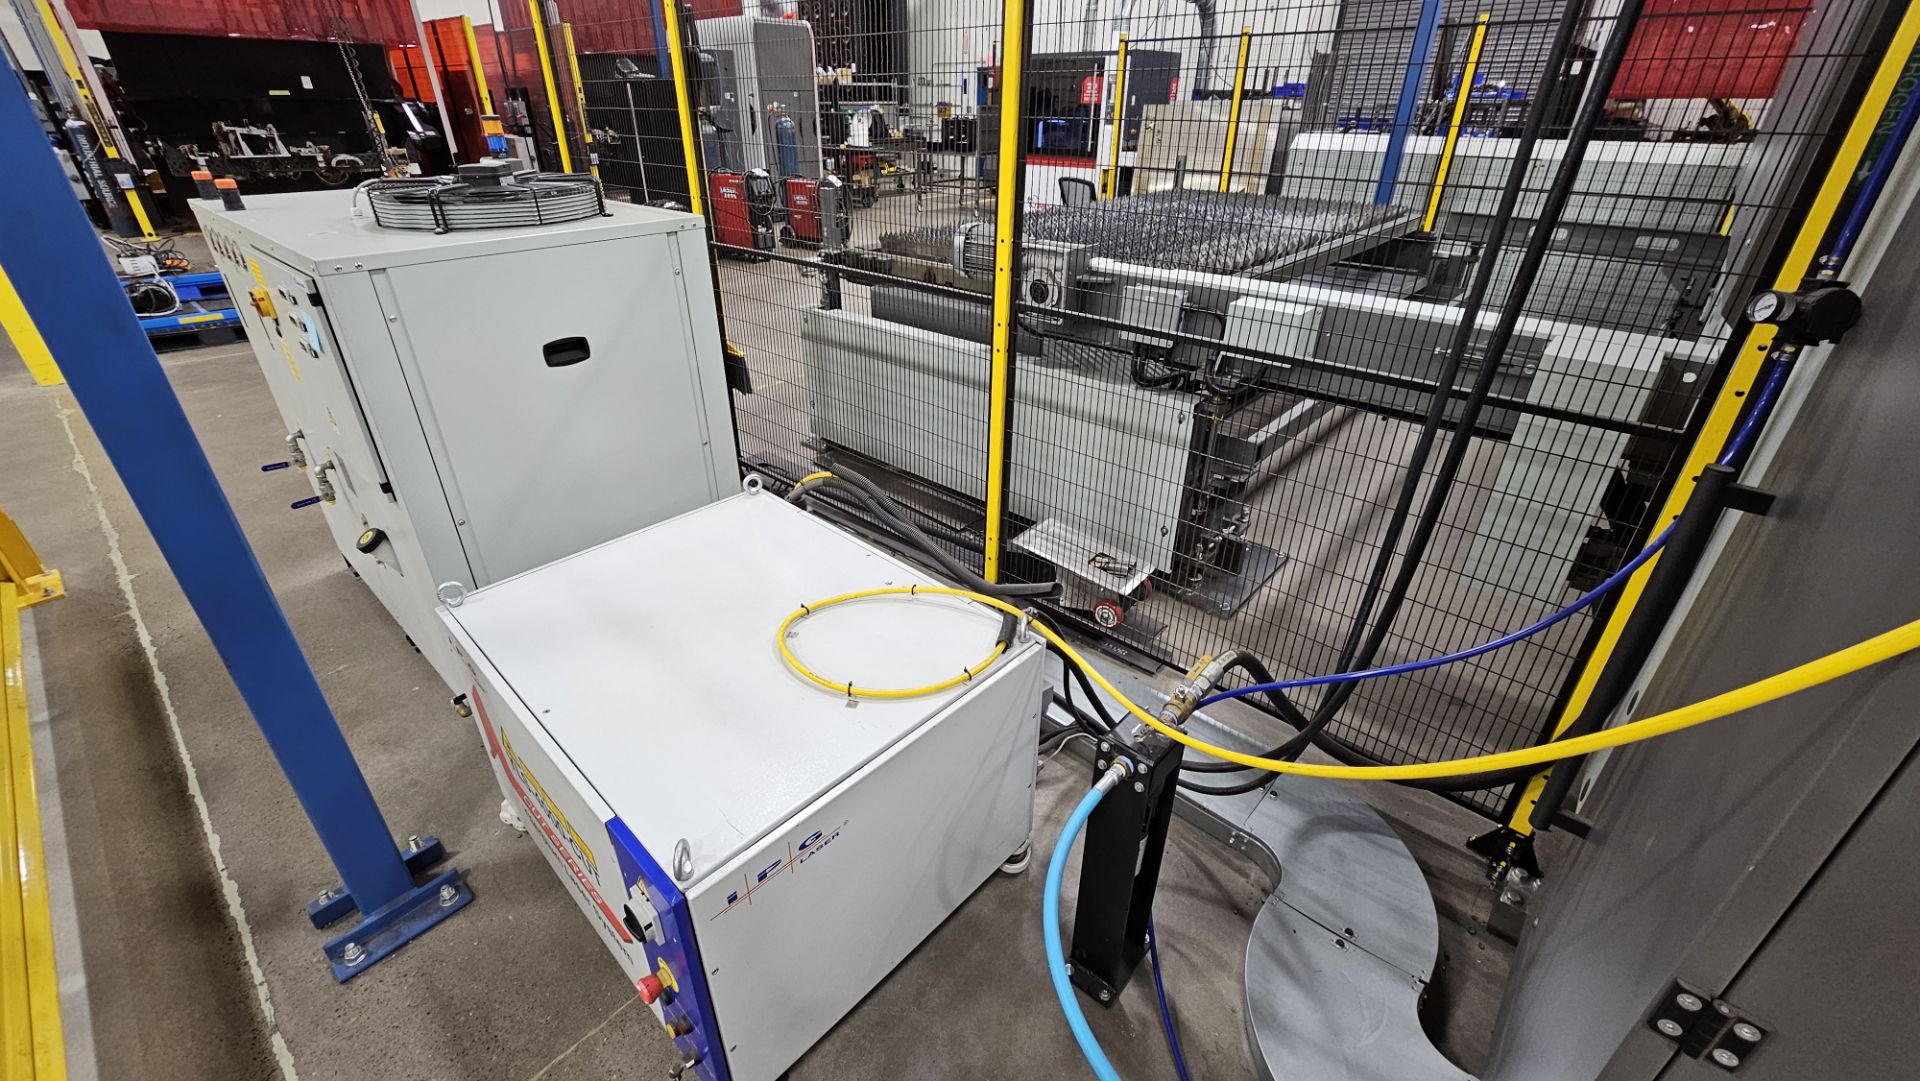 BLM LC5 4-kW Combination Tube & Sheet Metal Laser Cutting System - Image 36 of 43